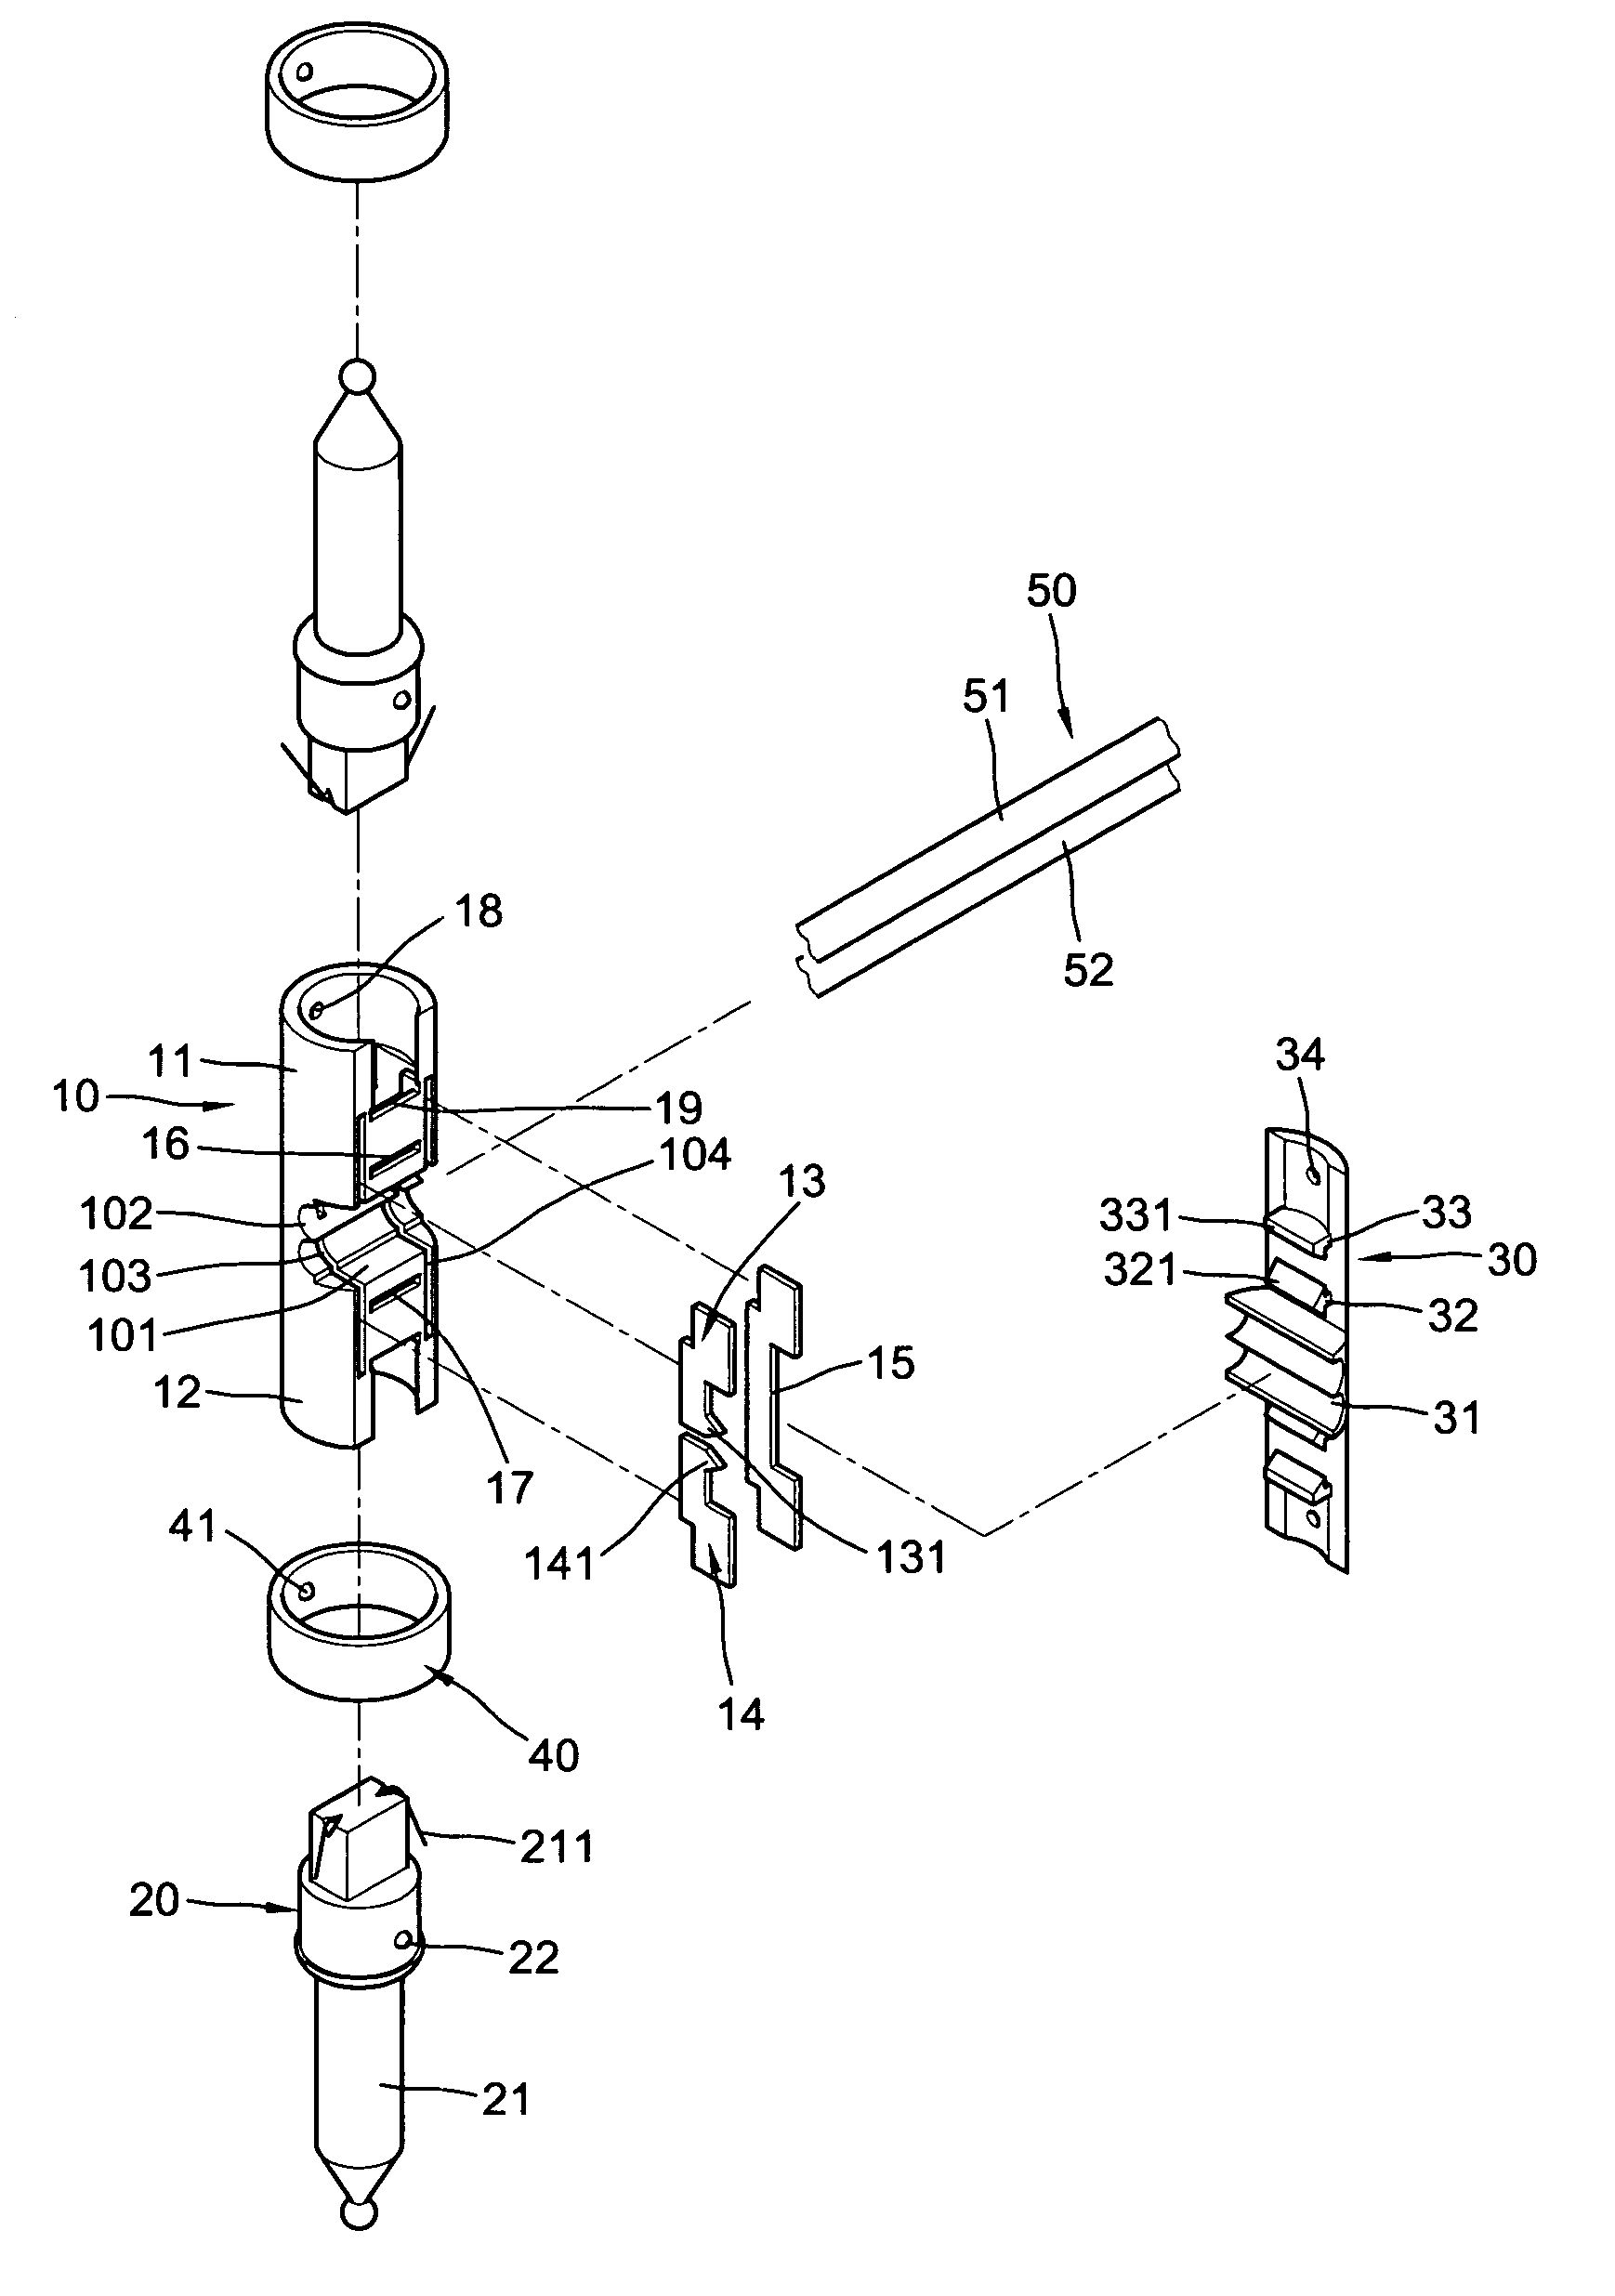 Single socket containing two lamps toward opposite directions